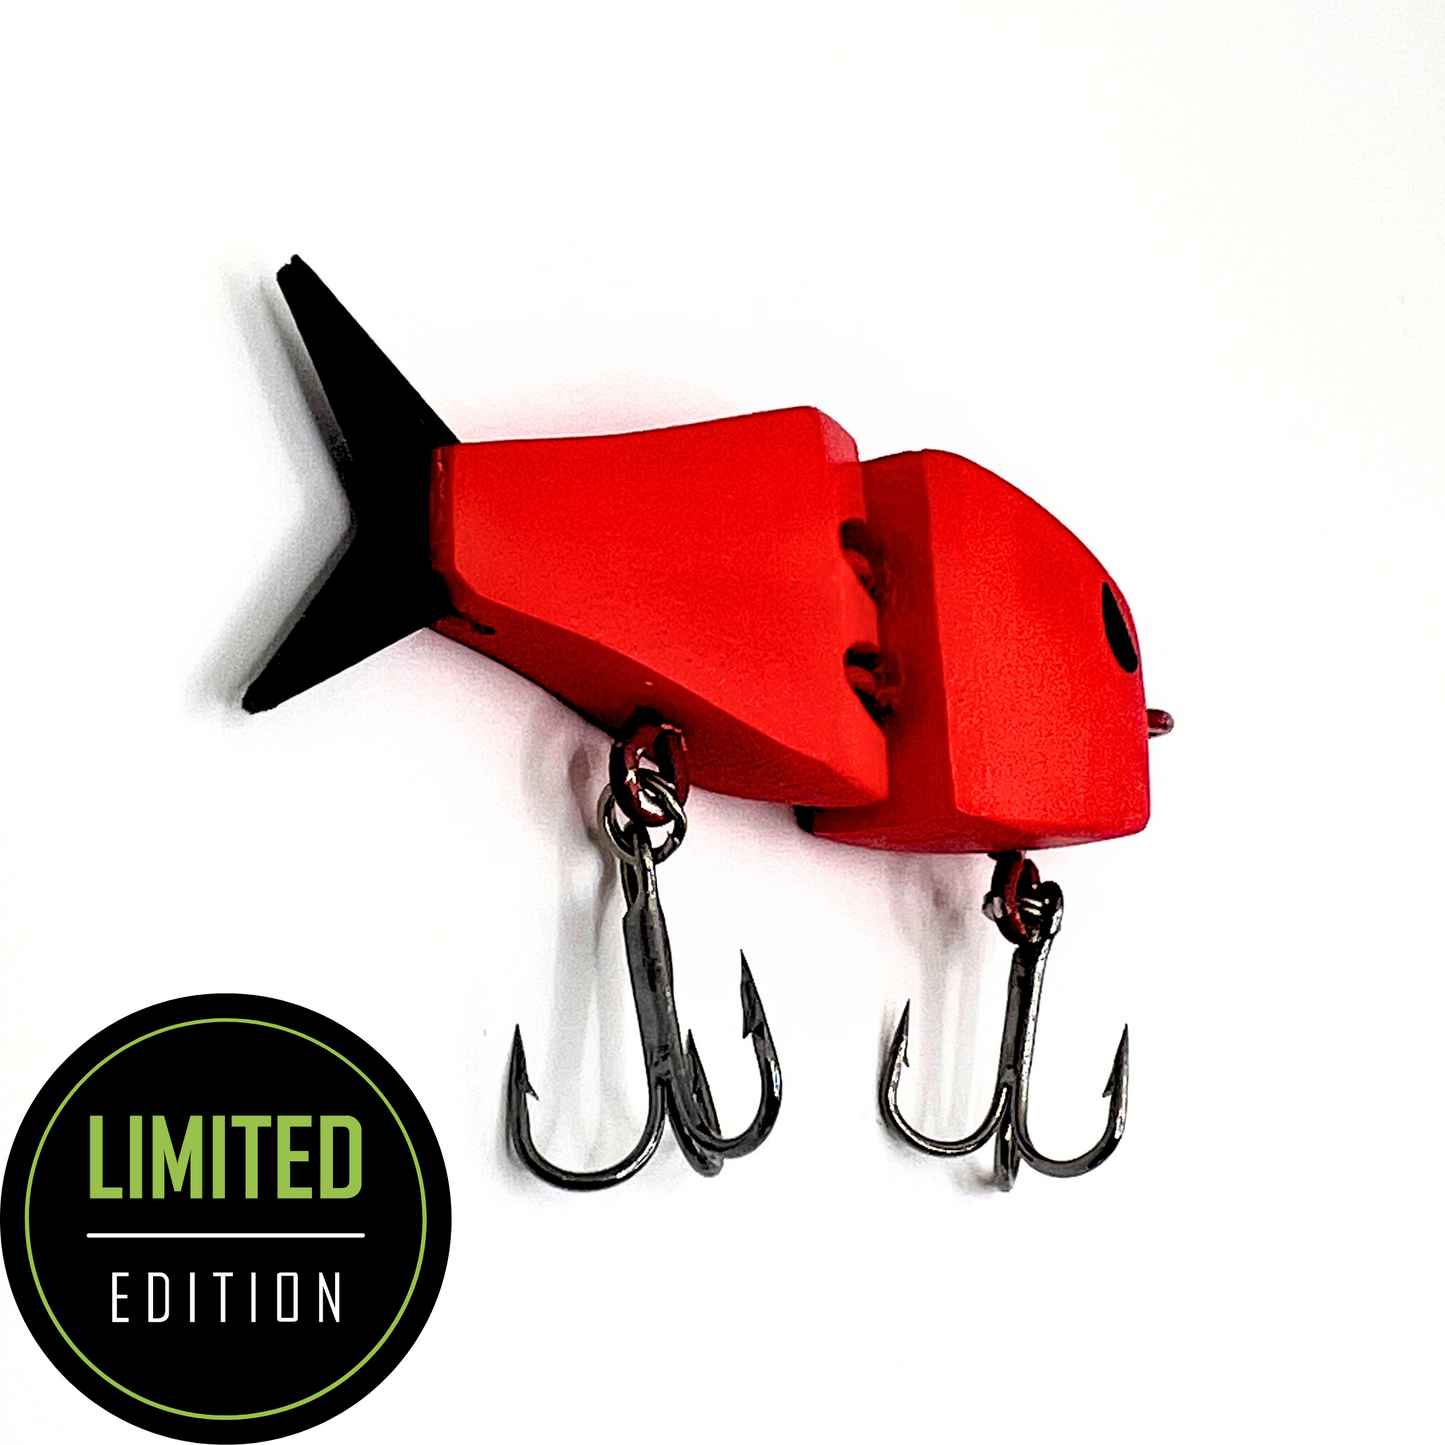 The RED Raptor (Limited Edition) - March 30